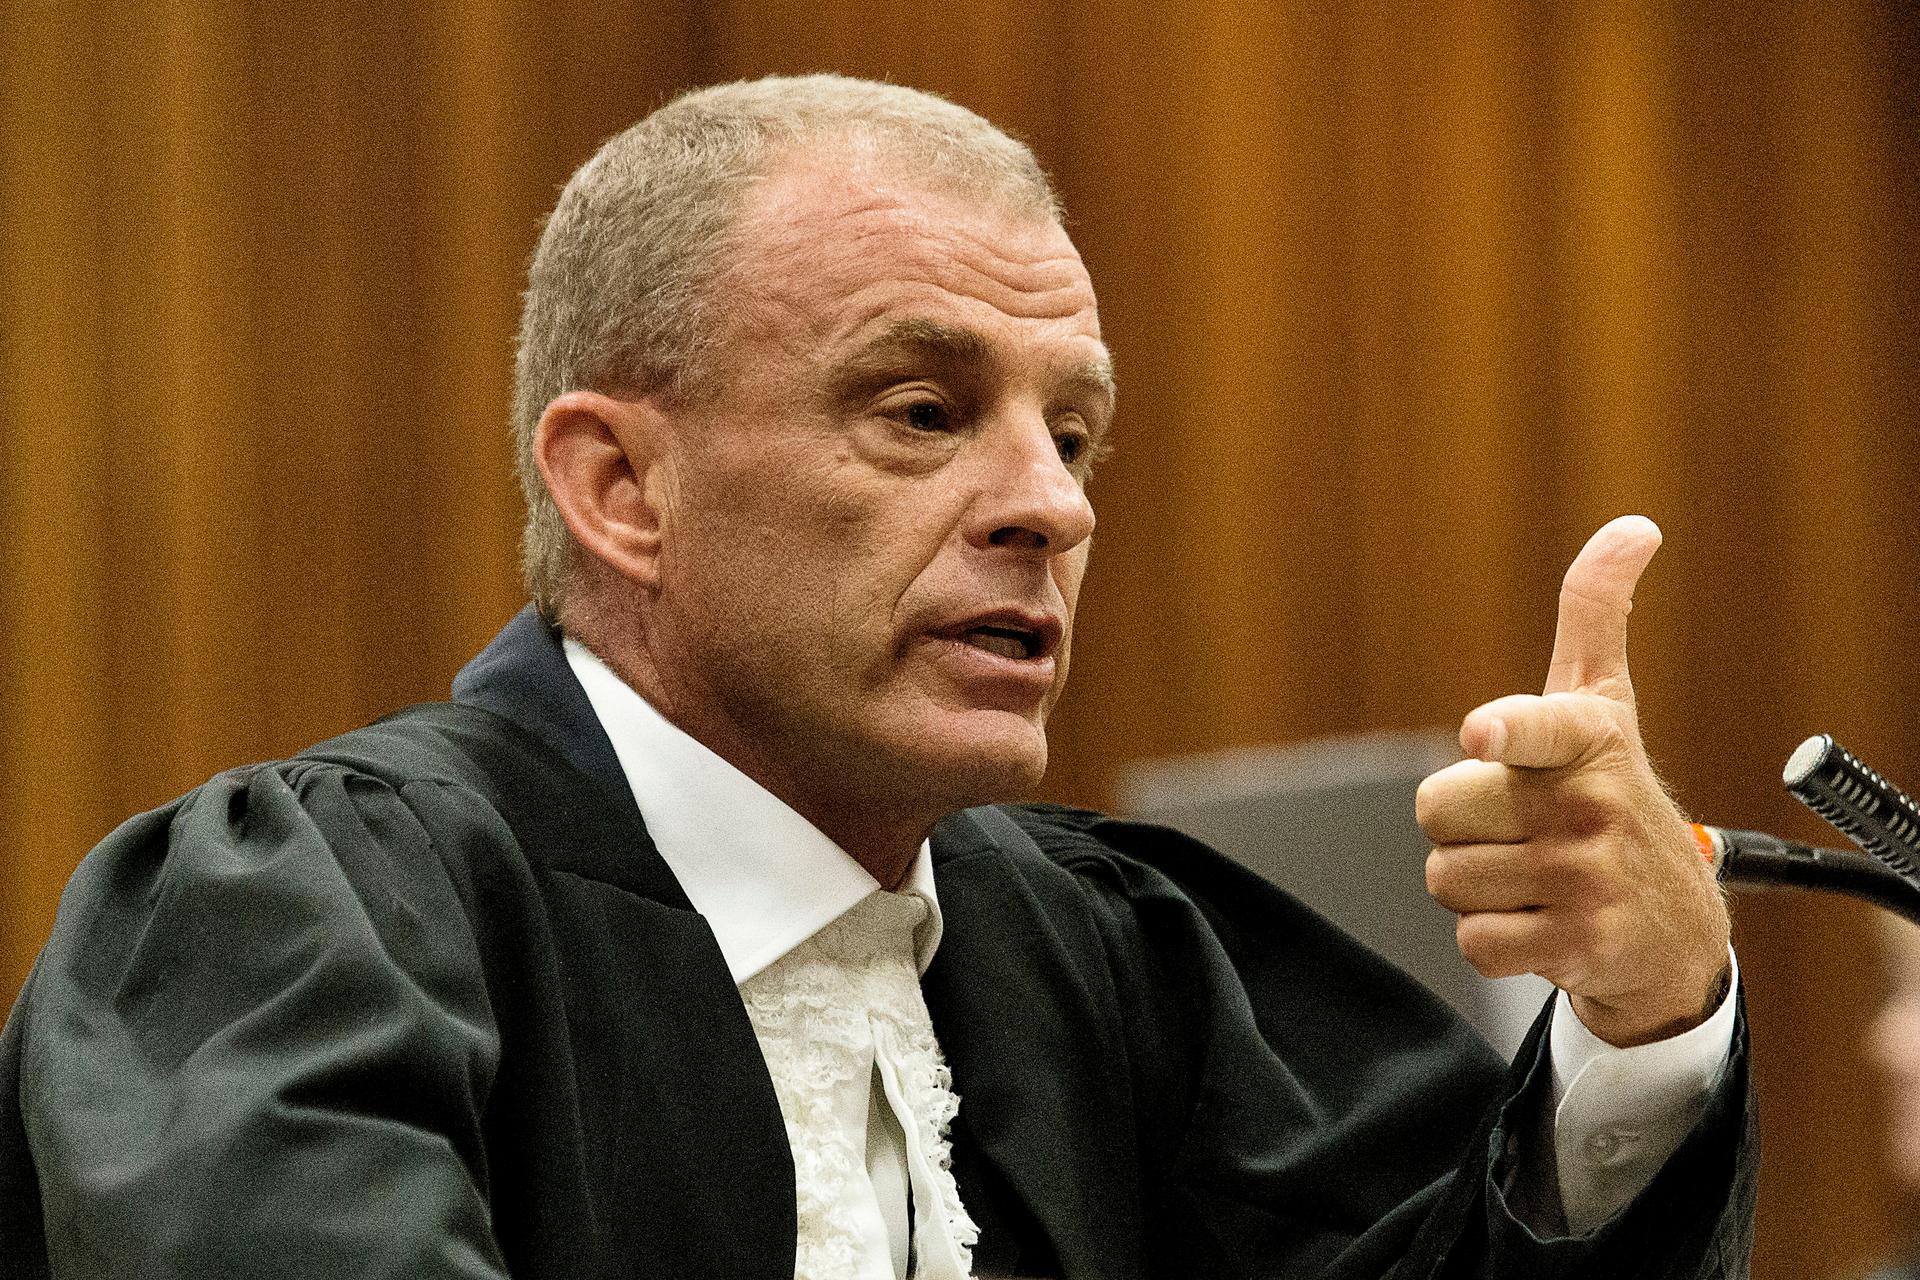 South African athlete Oscar Pistorius faced a second round of tough cross-examination by state prosecutor Gerrie Nel.